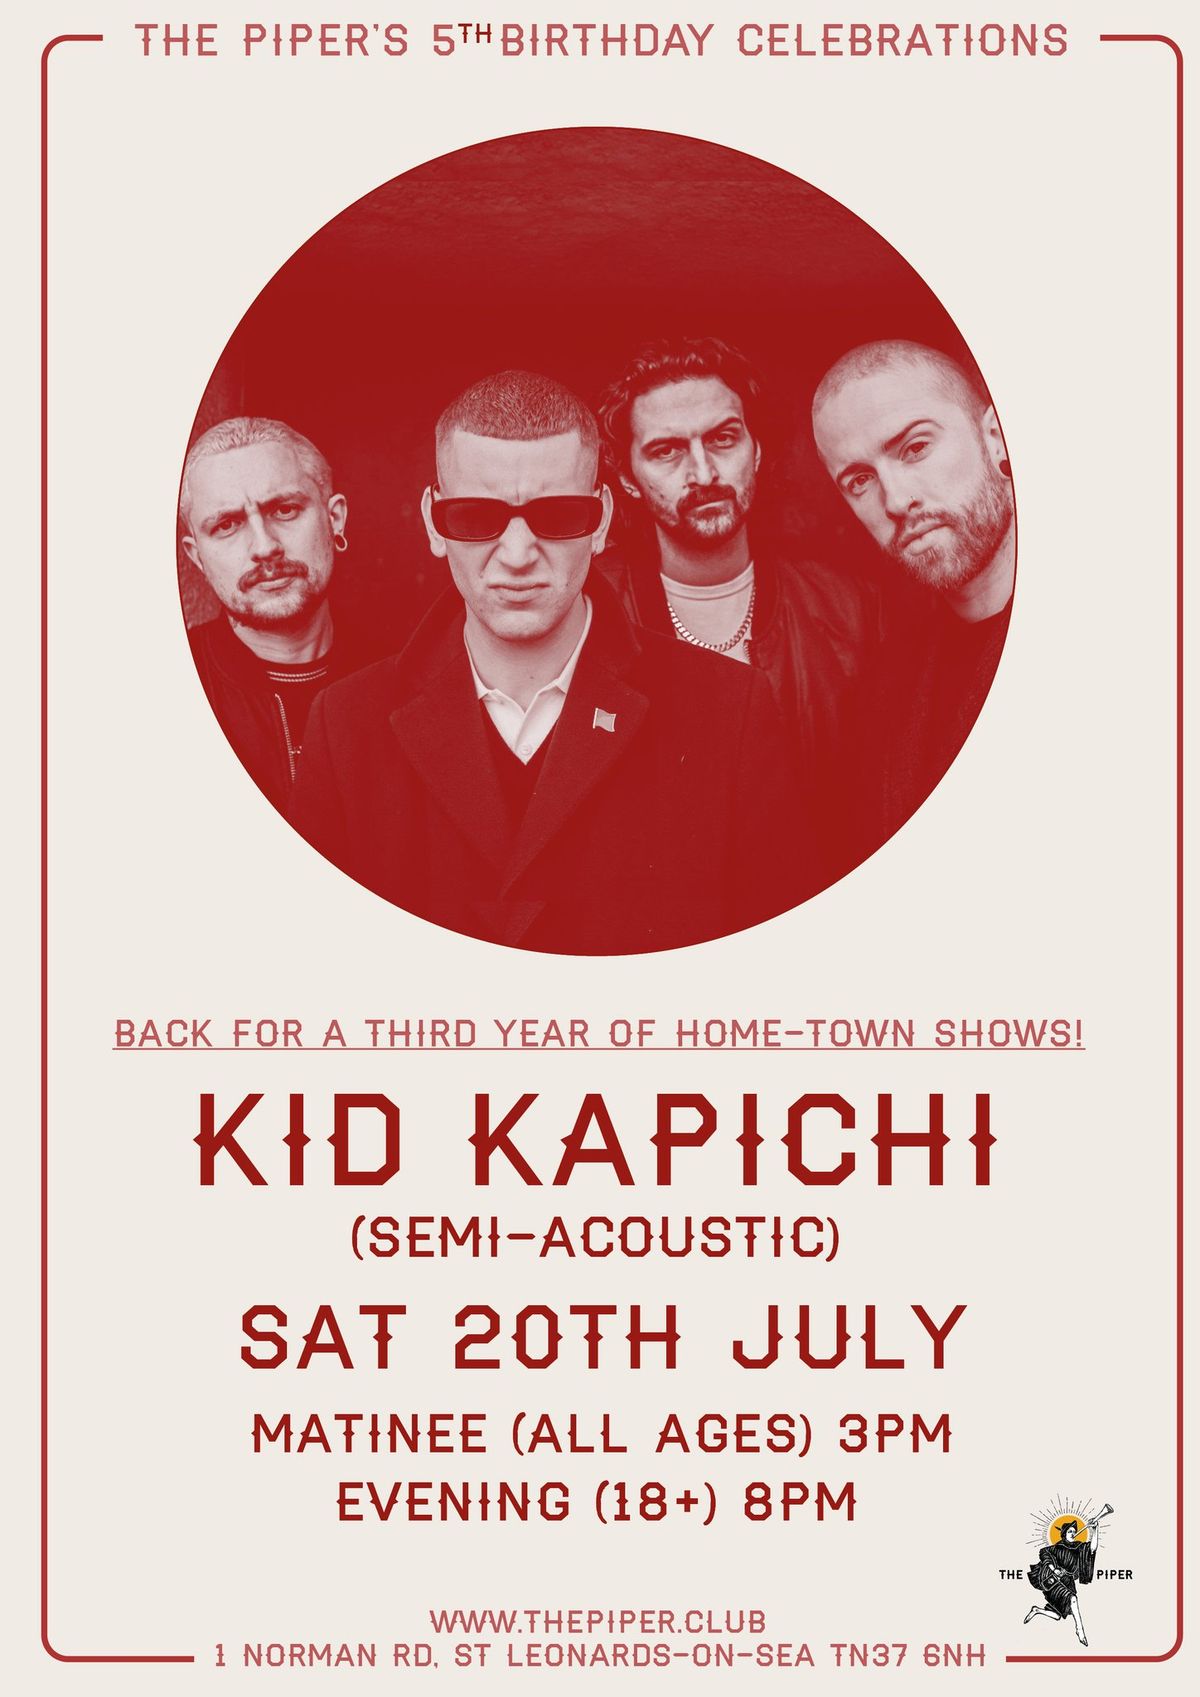 Kid Kapichi Afternoon Show at The Piper July 20th (all ages)